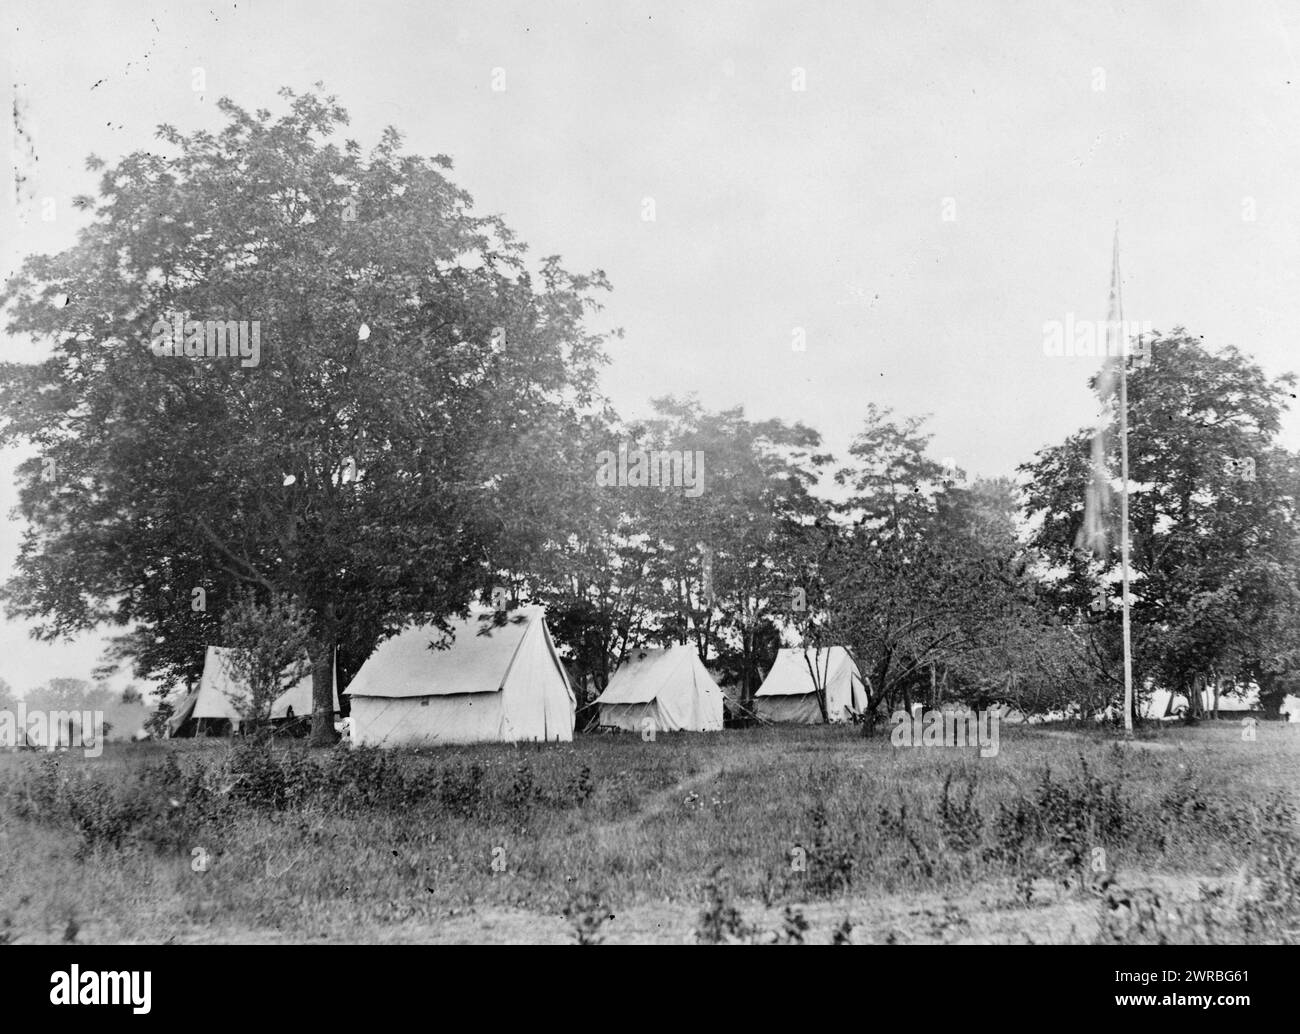 Headquarters of the Army of the Potomac, near Fairfax Court House, Va., June, 1863, Army tents and flagpole in grove of trees., photographed 1863, printed later, Military headquarters, Union, Virginia, Fairfax, 1860-1870, Photographic prints, 1860-1910., Photographic prints, 1860-1910, 1 photographic print Stock Photo